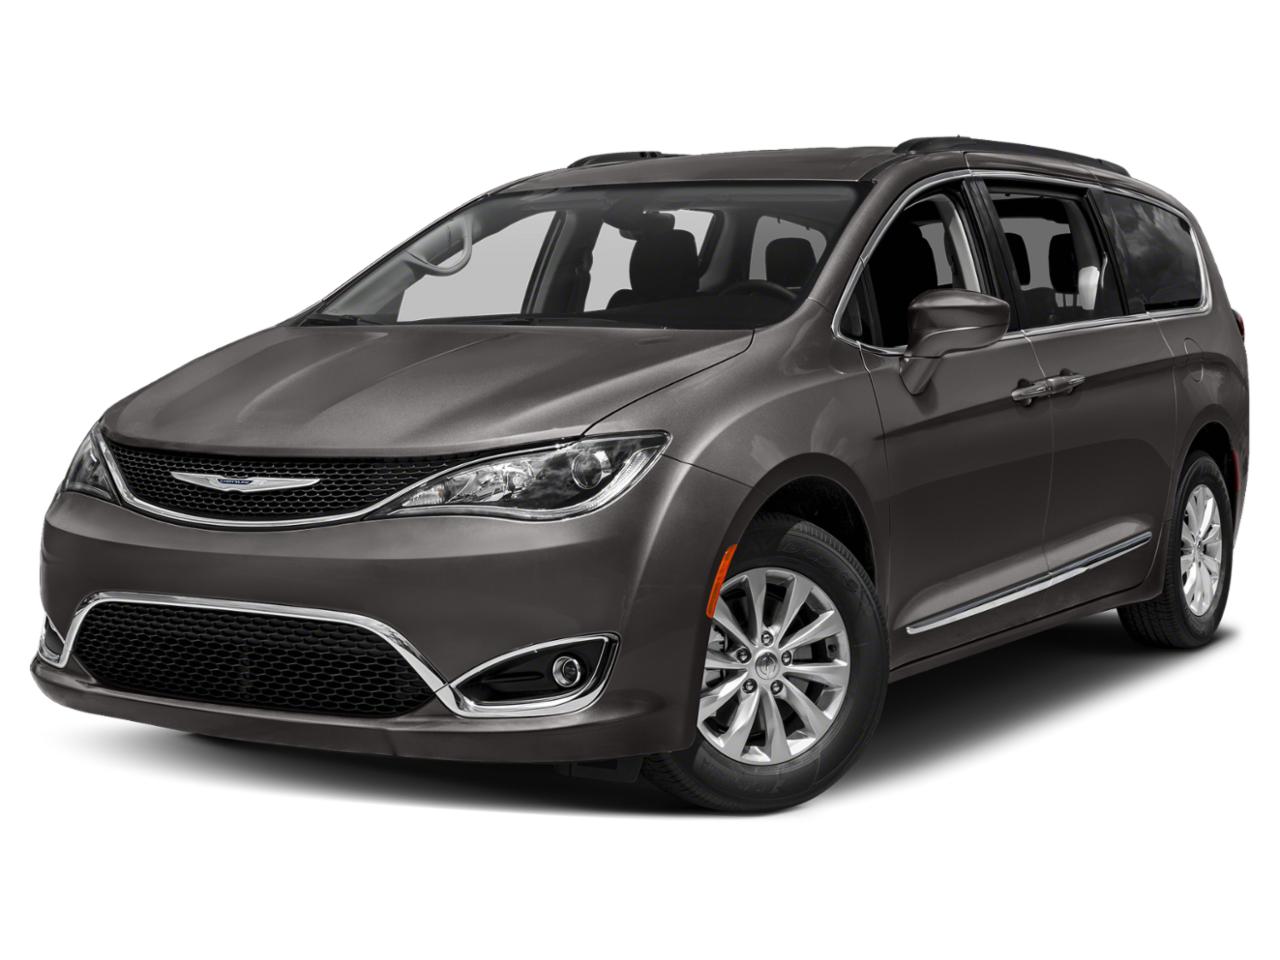 2019 Chrysler Pacifica Vehicle Photo in Saint Charles, IL 60174